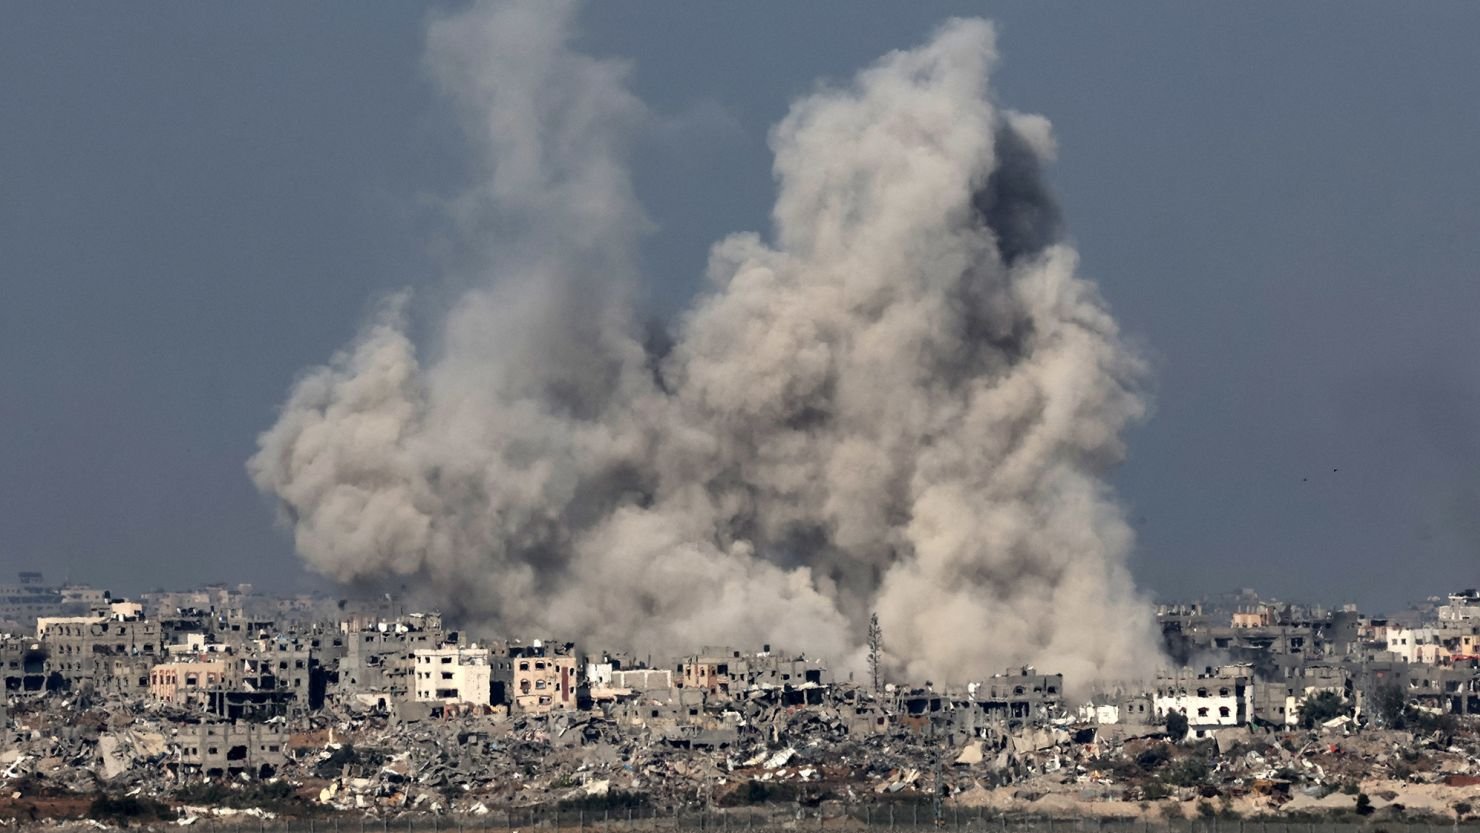 More than 60 people were killed in airstrikes on a refugee camp in Gaza